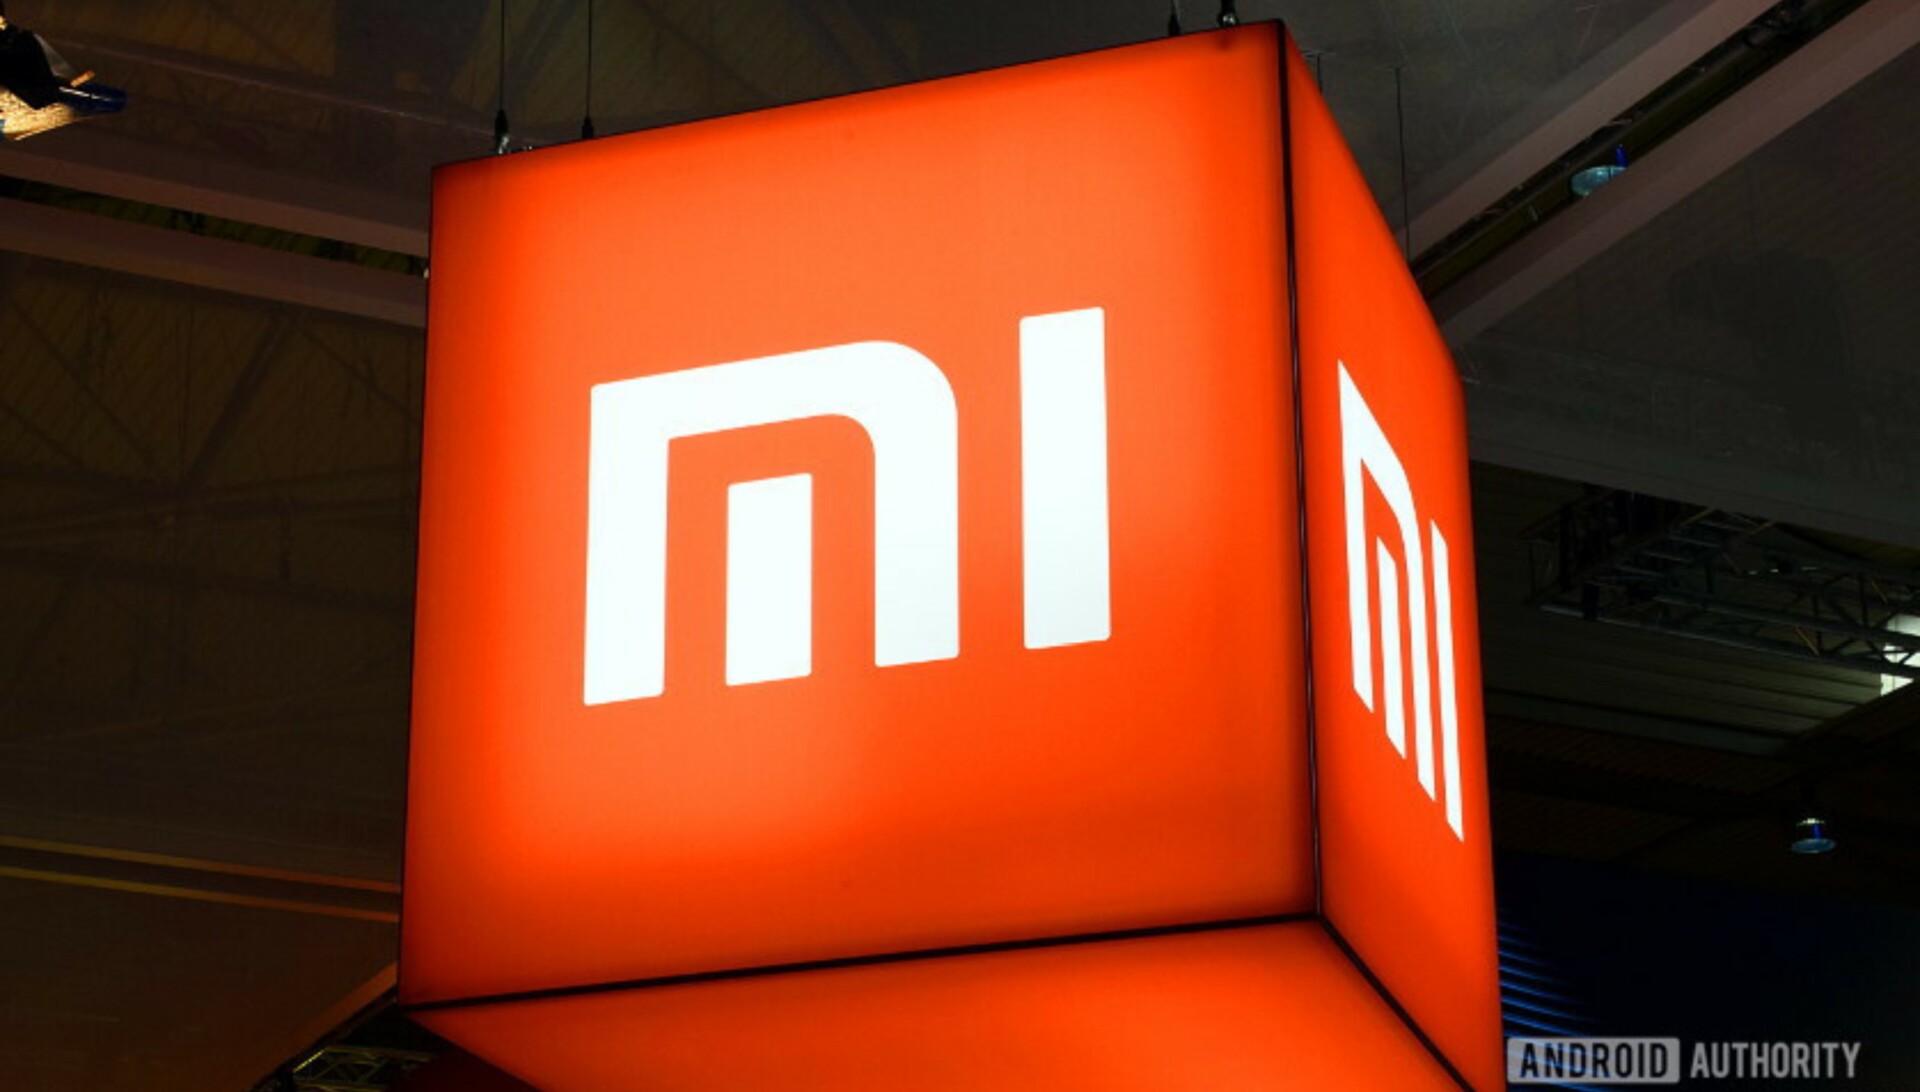 Xiaomi buyer's guide: Everything you need to know